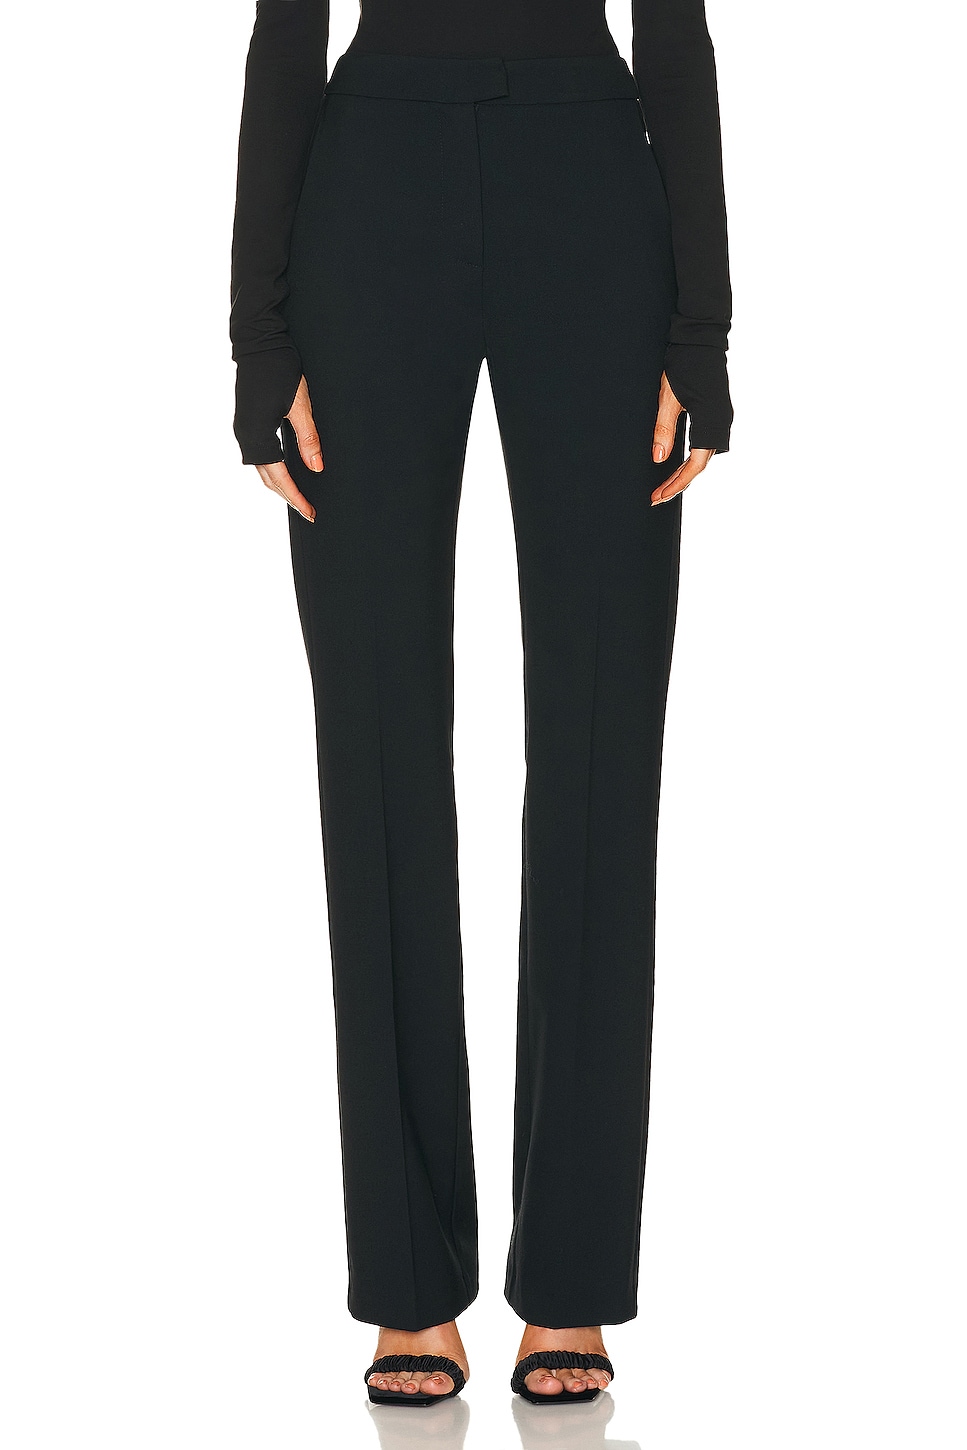 Image 1 of The Andamane Gladys Straight Pant in Black